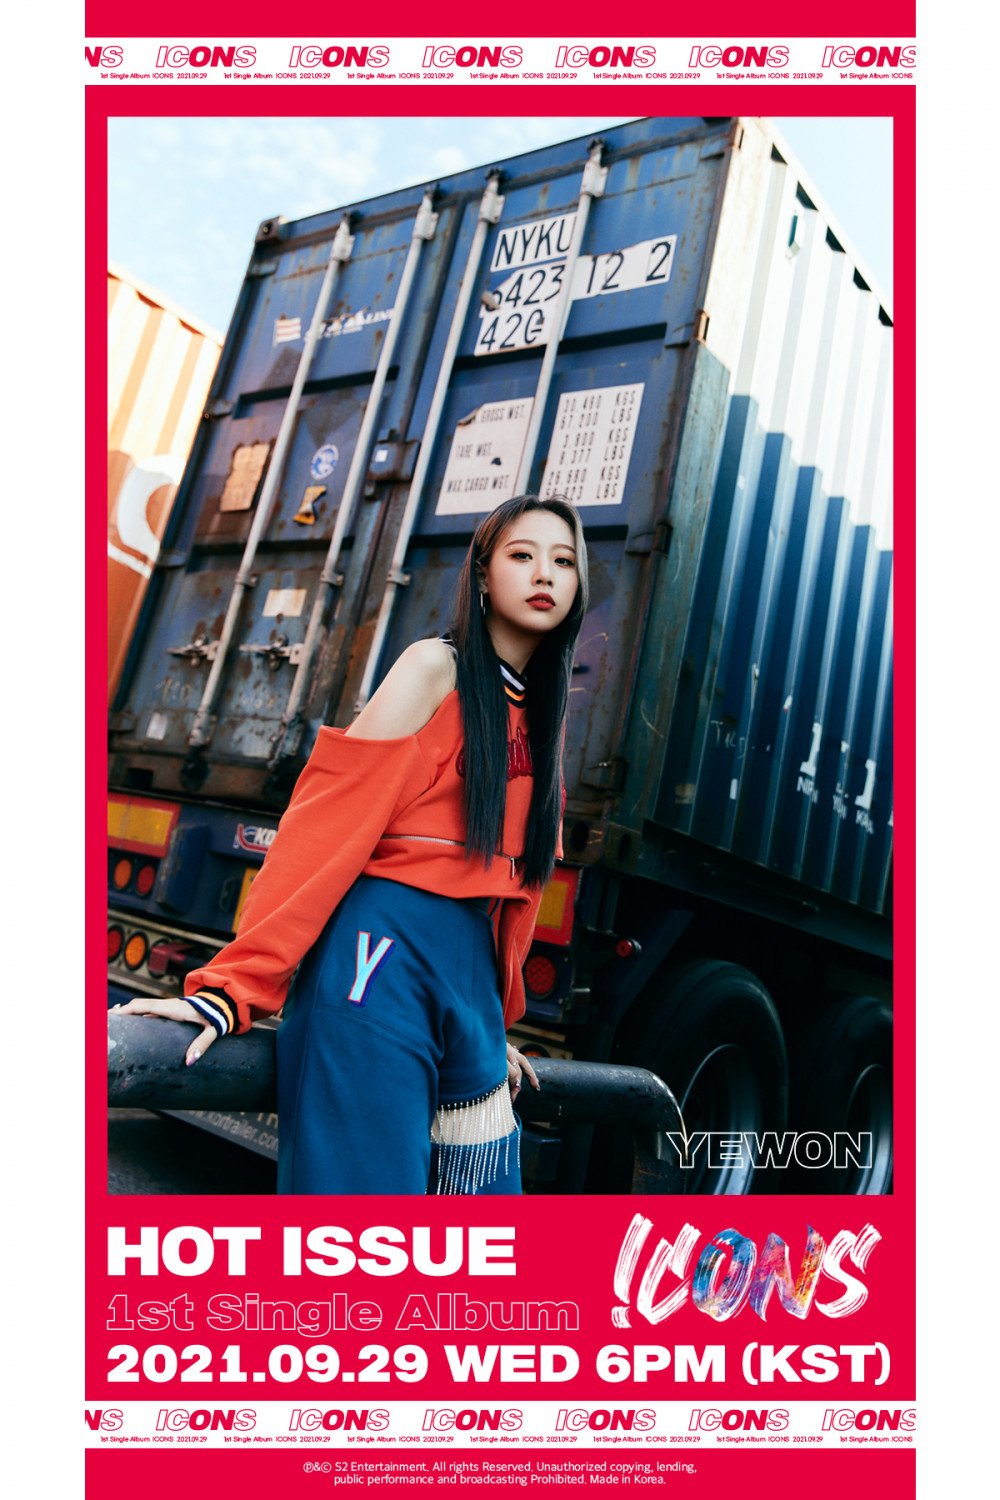 HOT ISSUE - teasers of Yewon for ‘ICONS’